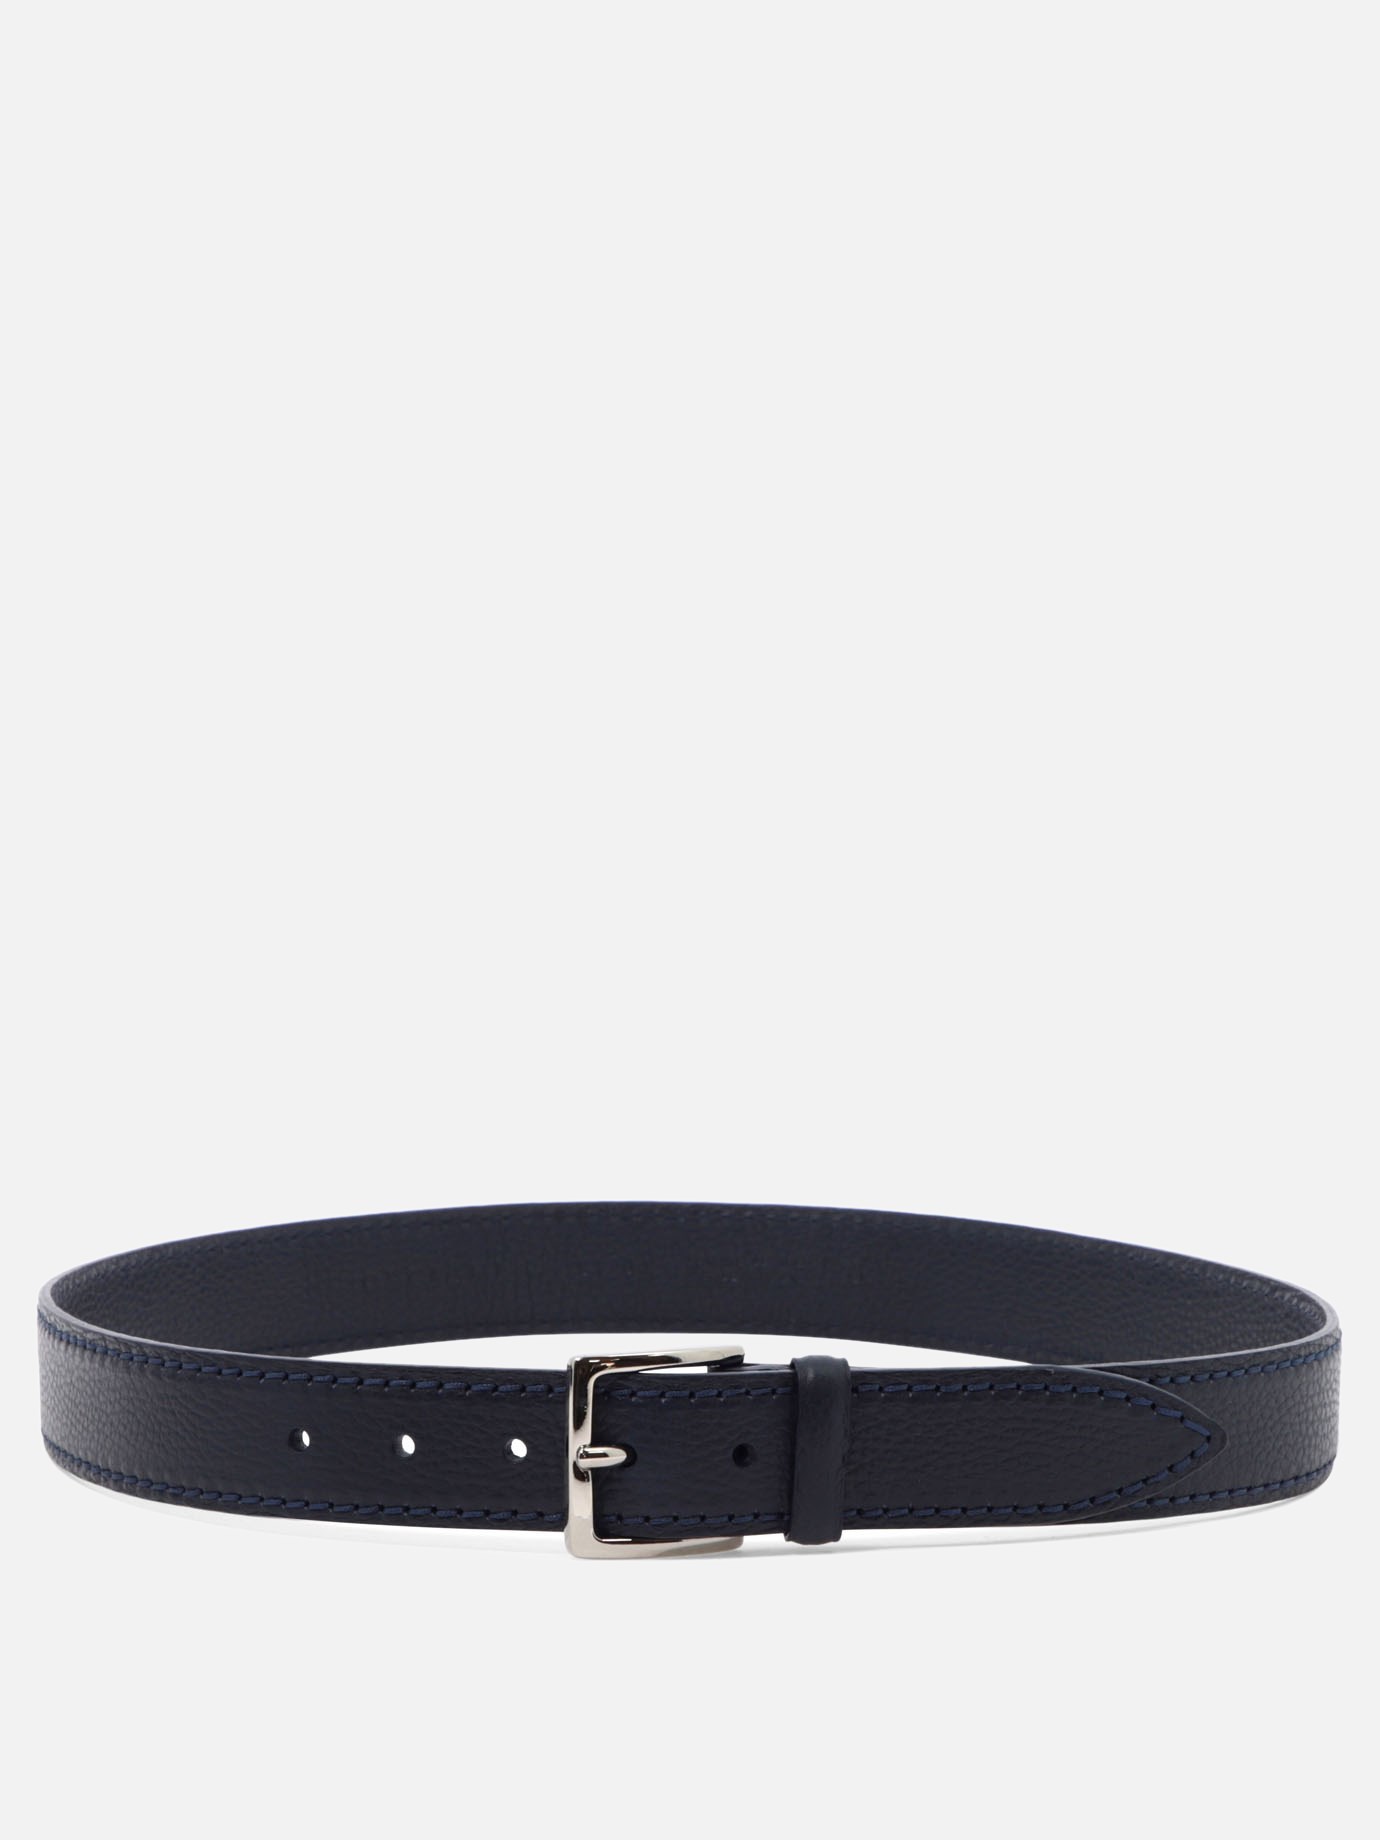 Dollar leather beltby Orciani - 3